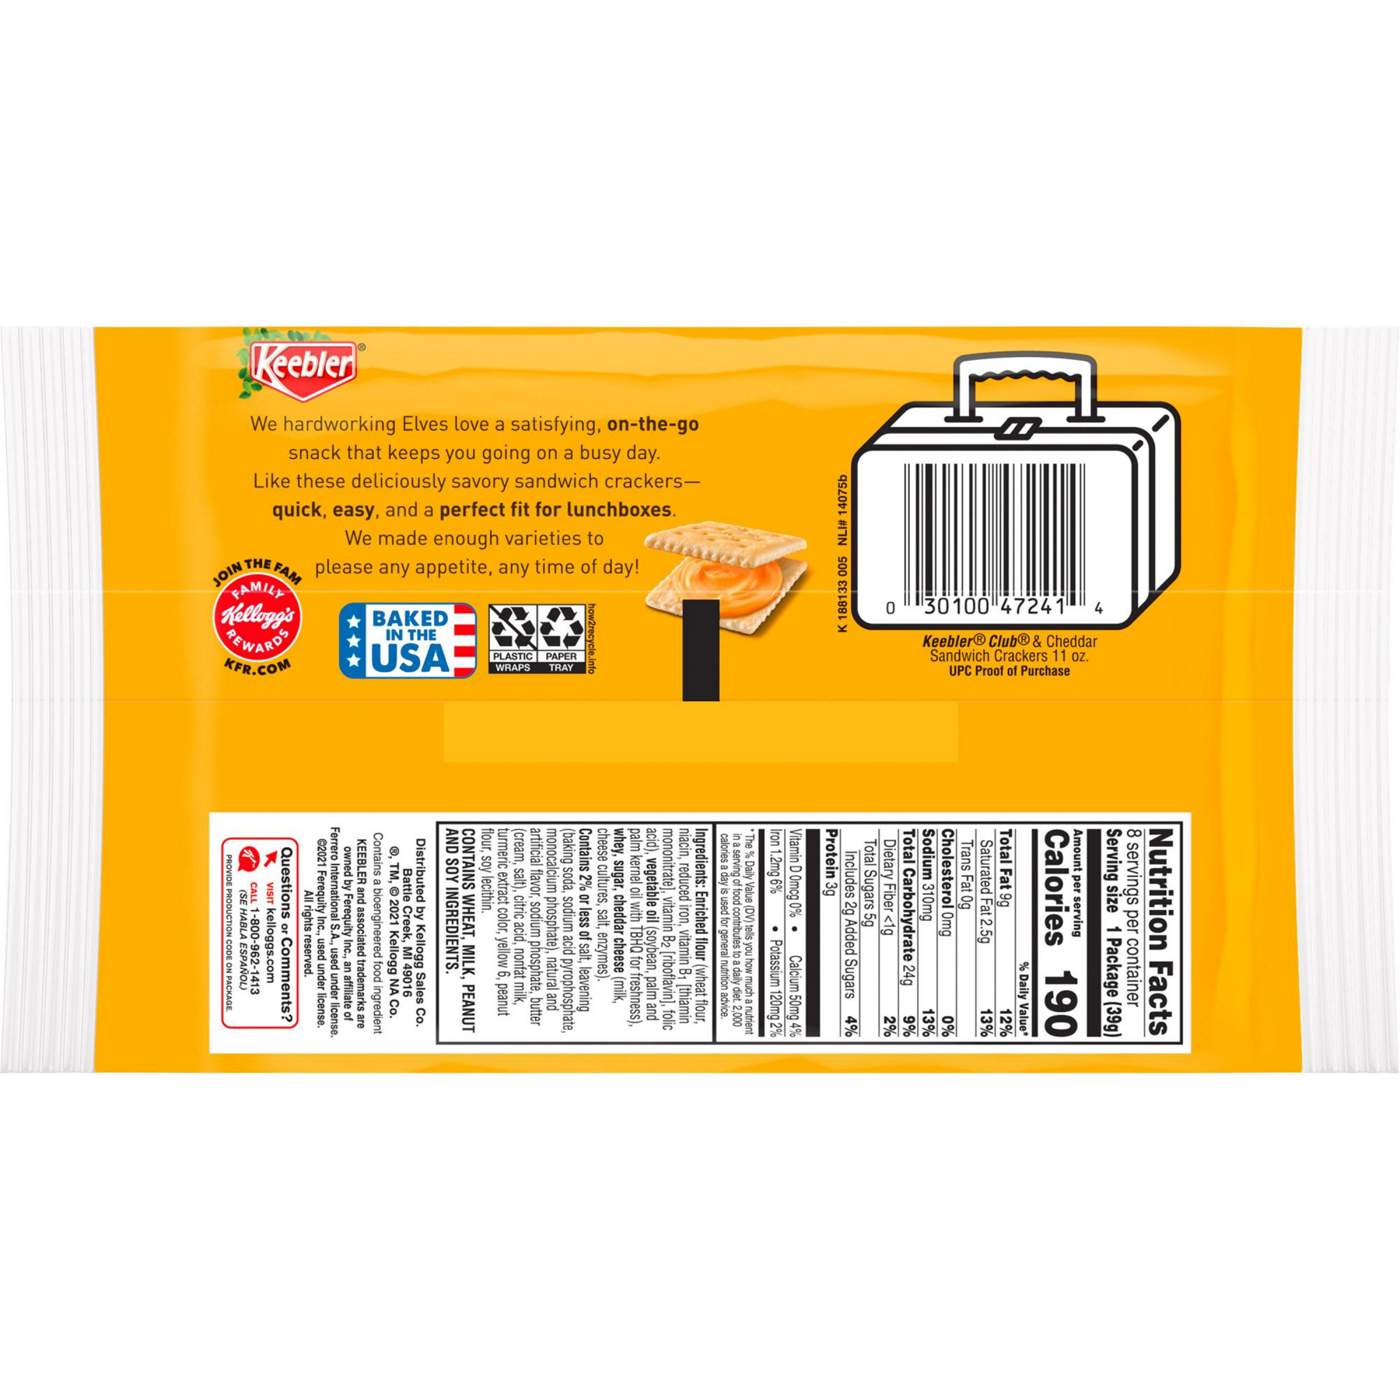 Keebler Club and Cheddar Sandwich Crackers; image 3 of 3